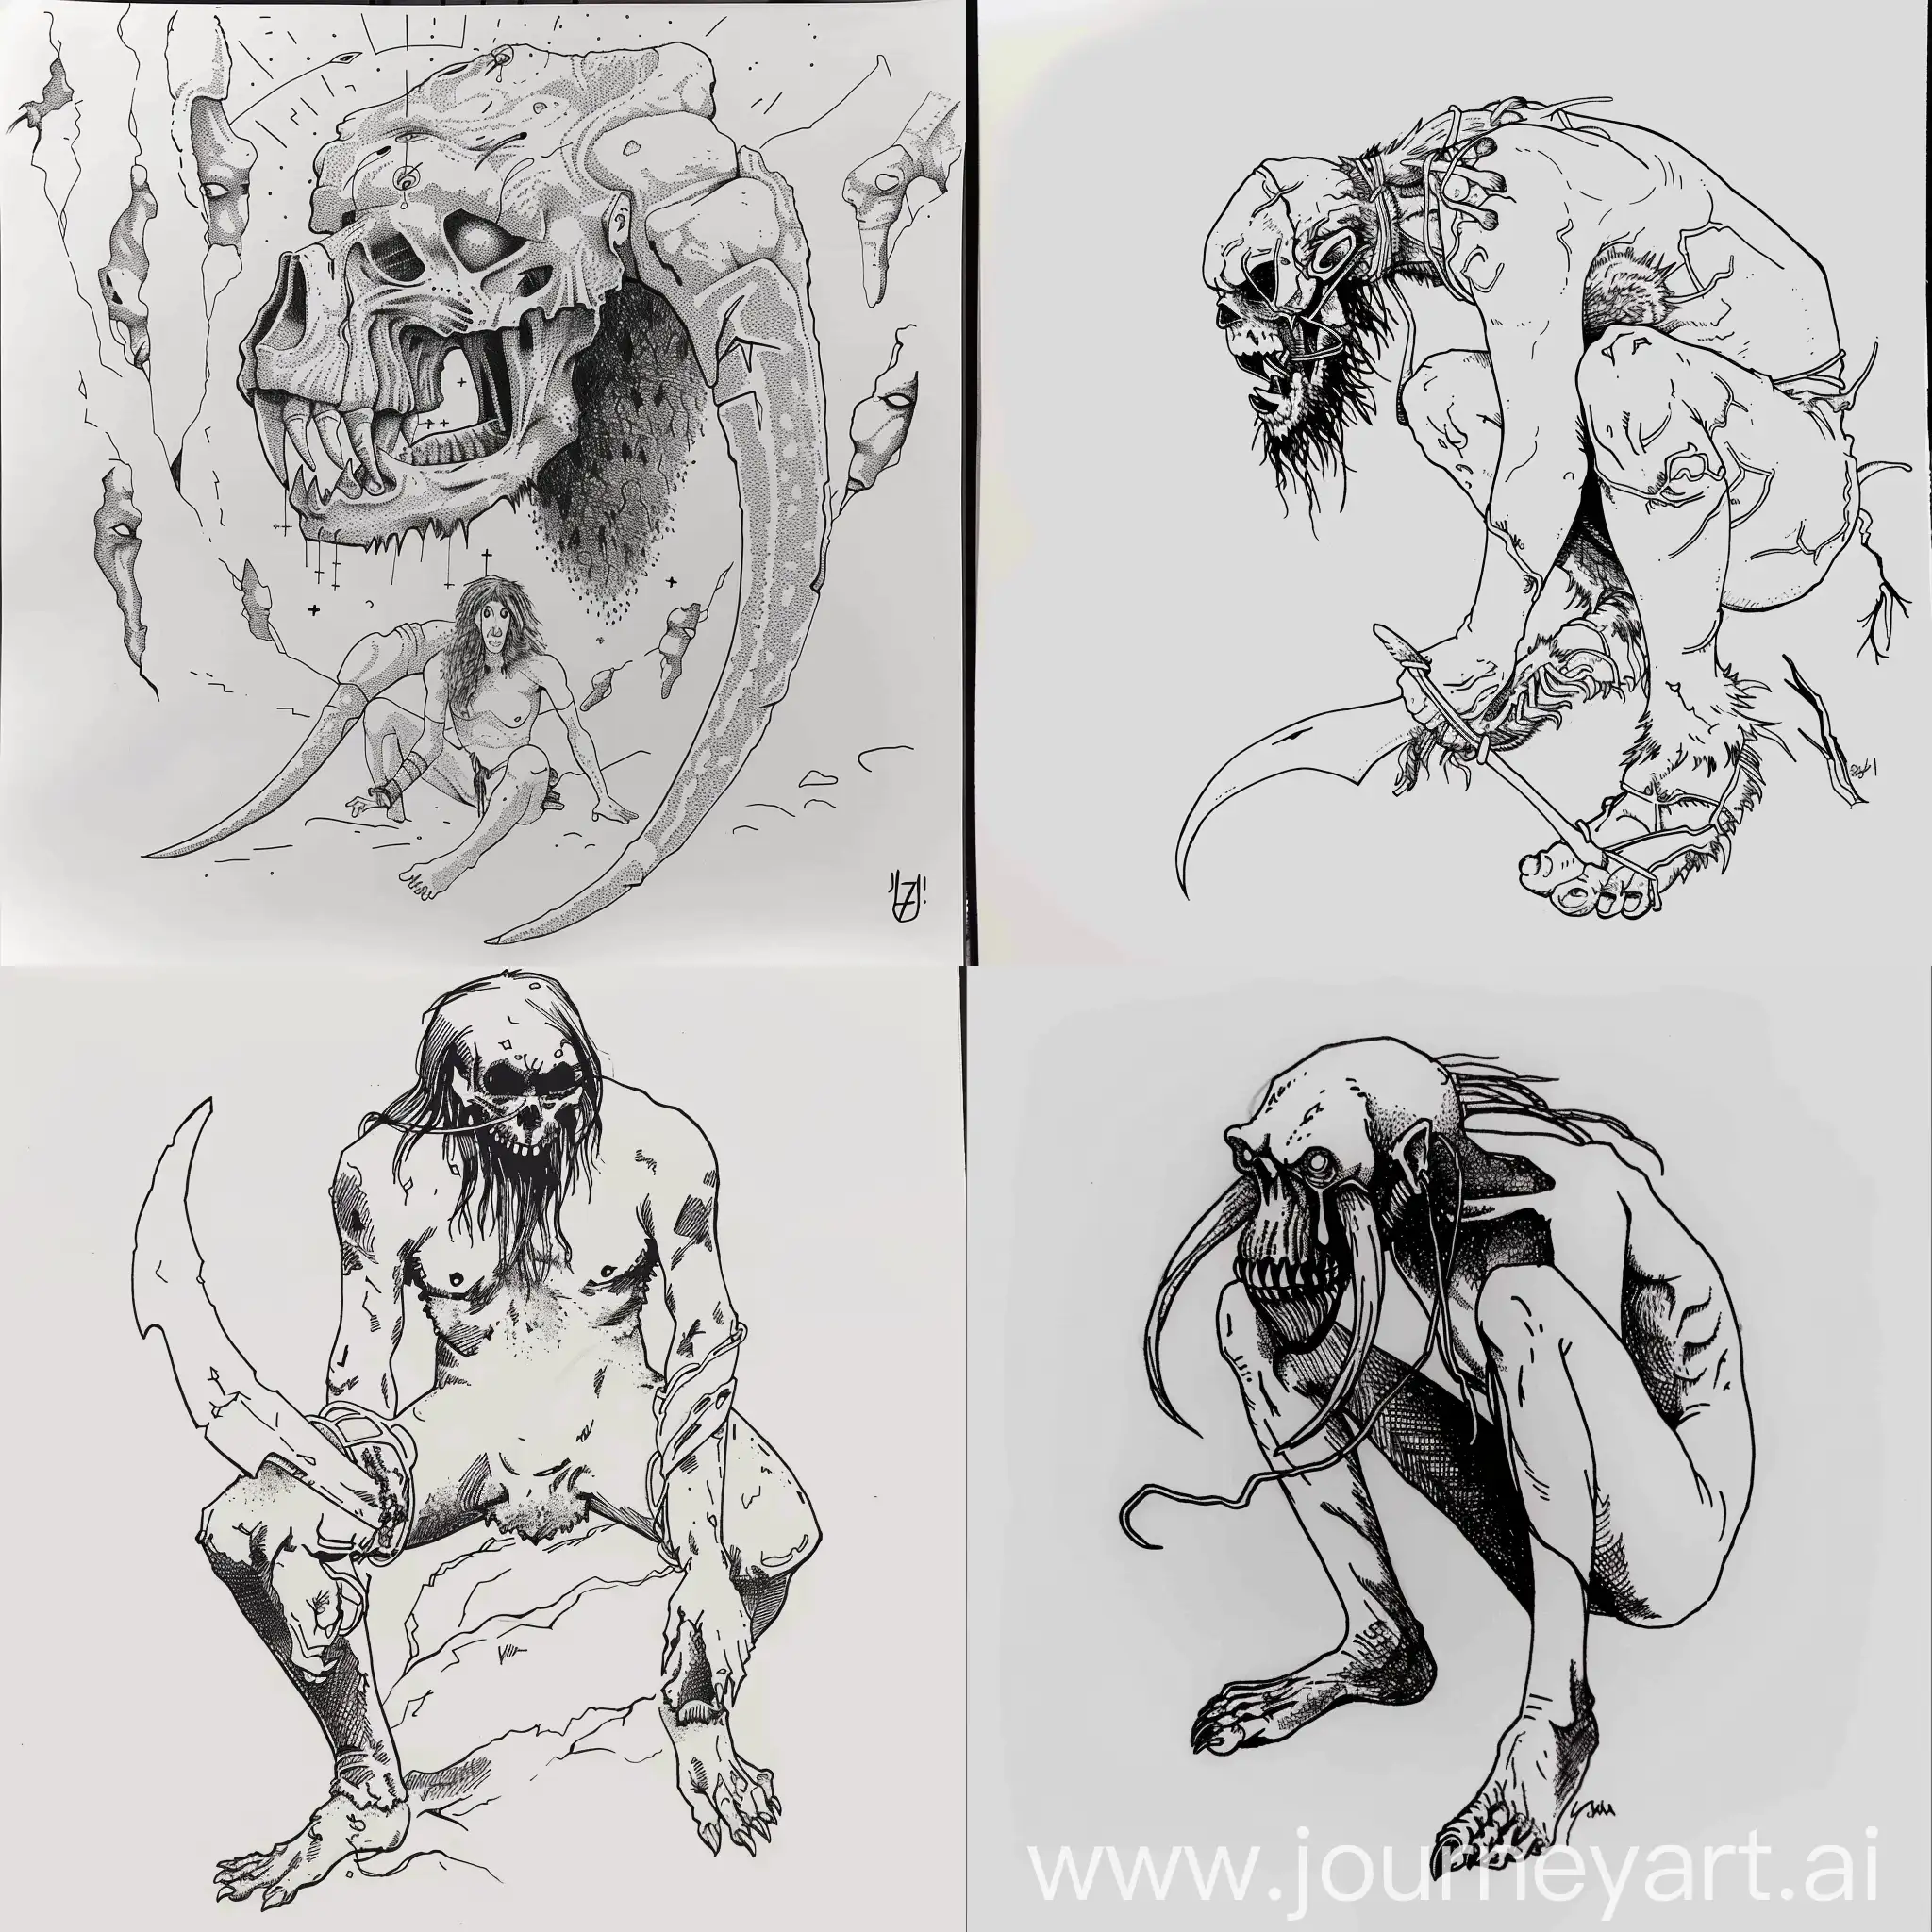 Surreal-Neolithic-SaberToothed-Humans-in-Detailed-Line-Drawings